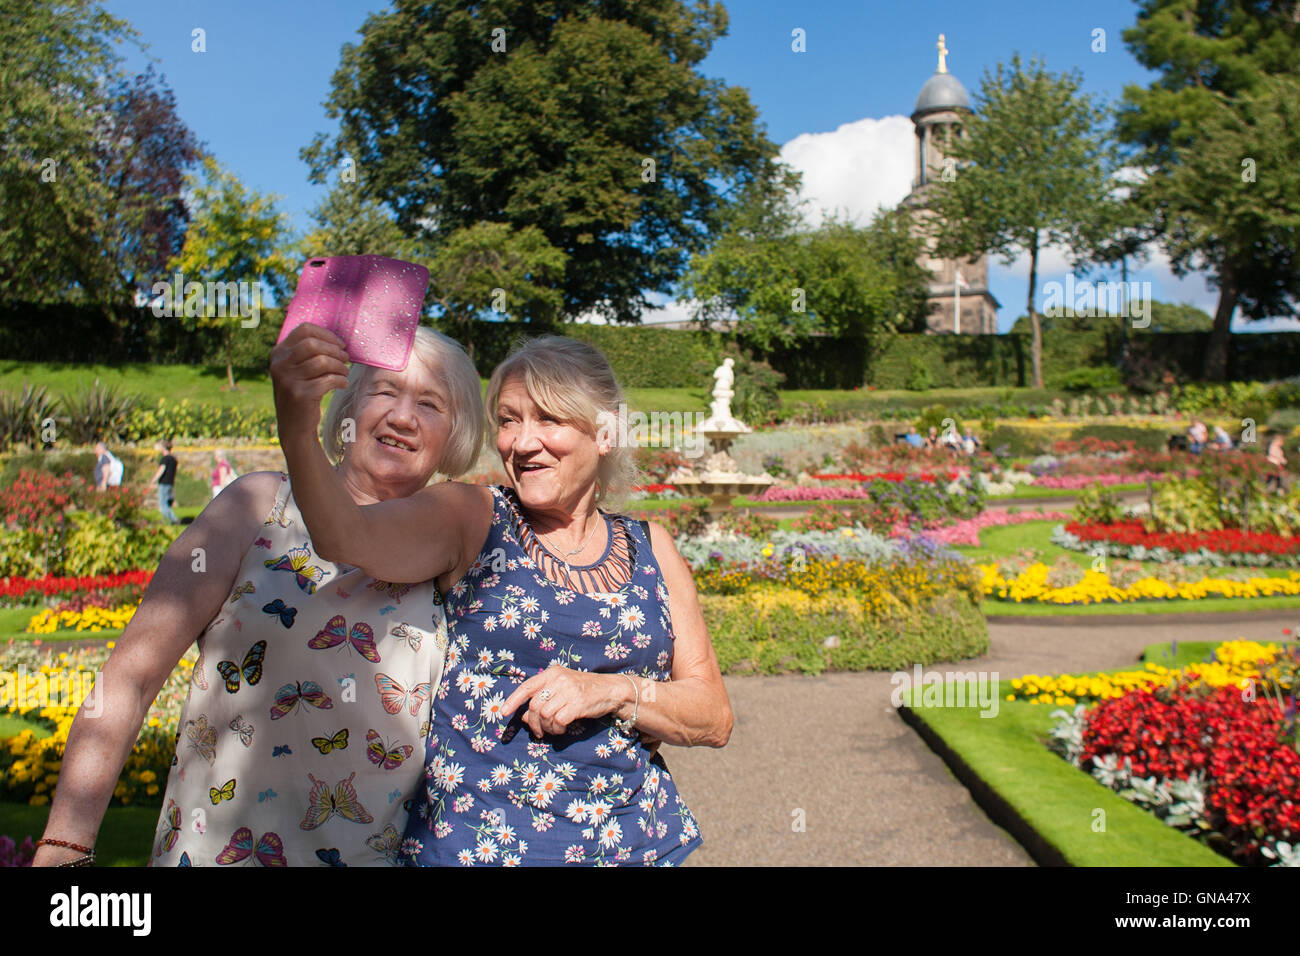 Shrewsbury, Shropshire, UK. 29th August 2016. Two ladies taking a selfie in The Dingle, the famous floral attraction in Shrewsbury’s park. © Richard Franklin/Alamy Live News Credit:  Richard Franklin/Alamy Live News Stock Photo